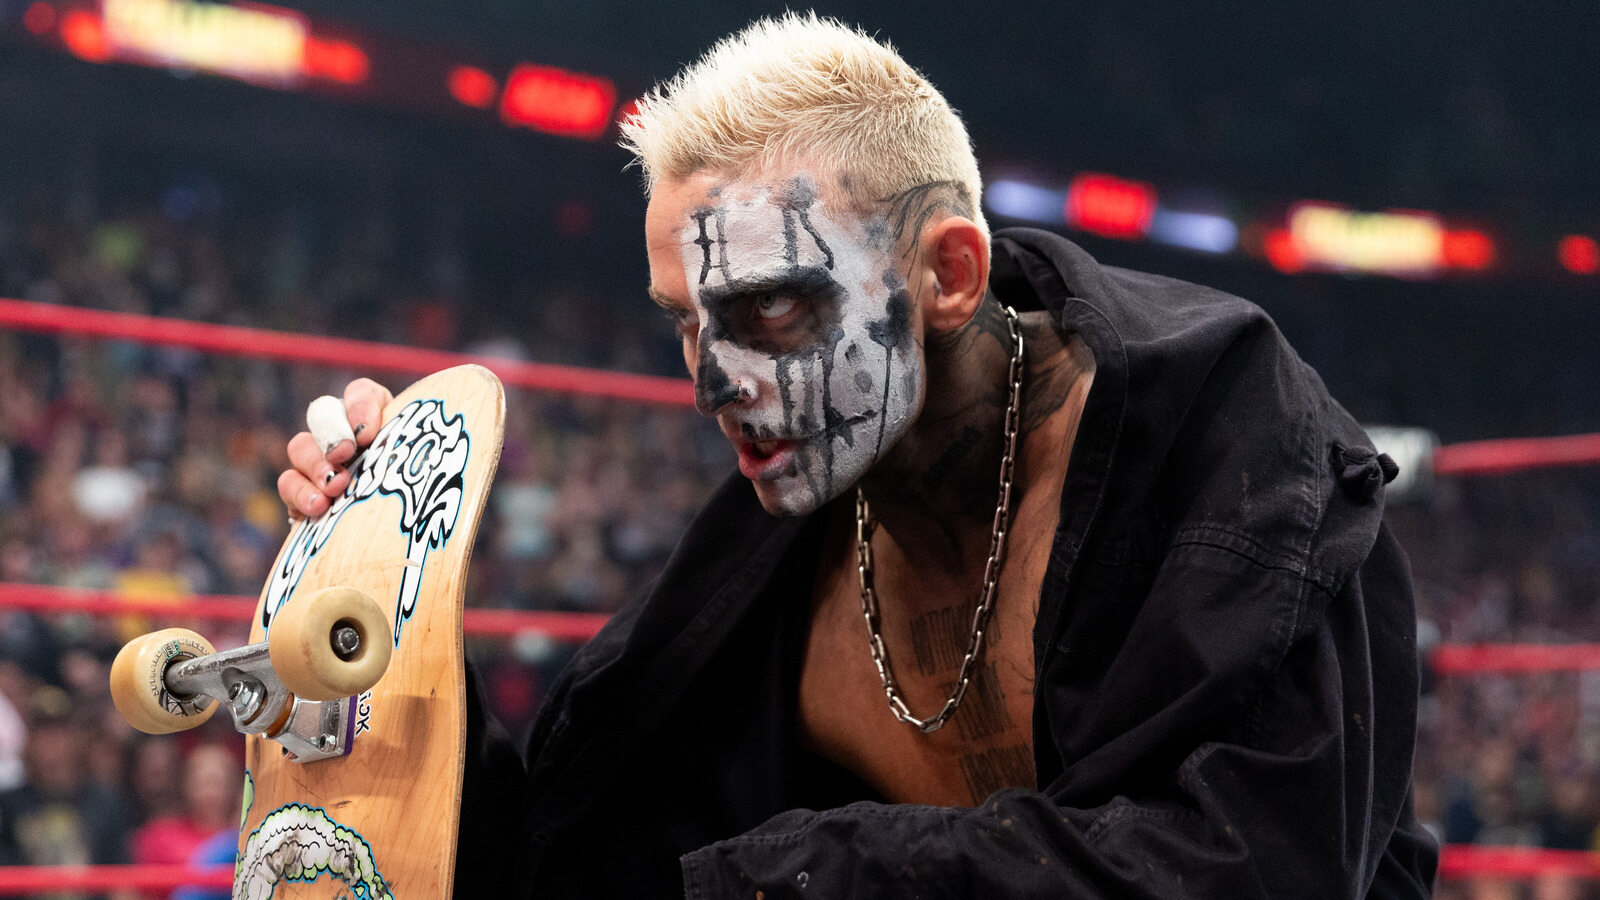 AEW Star Darby Allin Calls Sting Retirement Match The Biggest Moment Of His Career